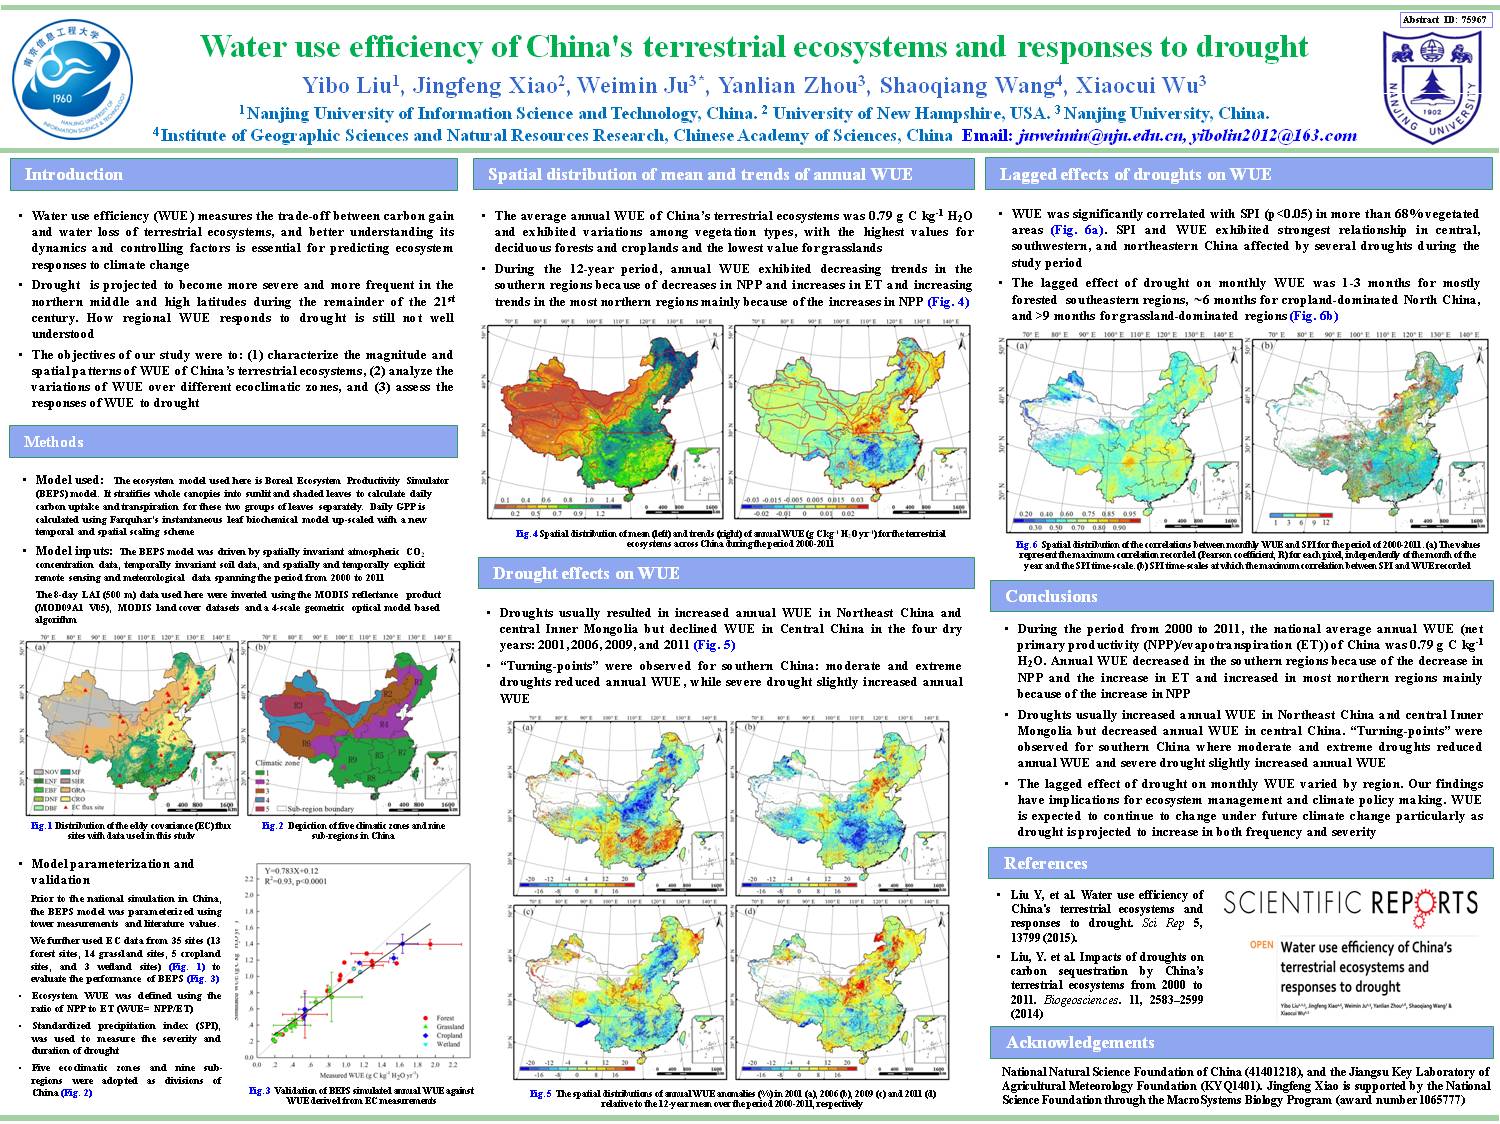 Water Use Efficiency Of China's Terrestrial Ecosystems And Responses To Drought by jfxiao